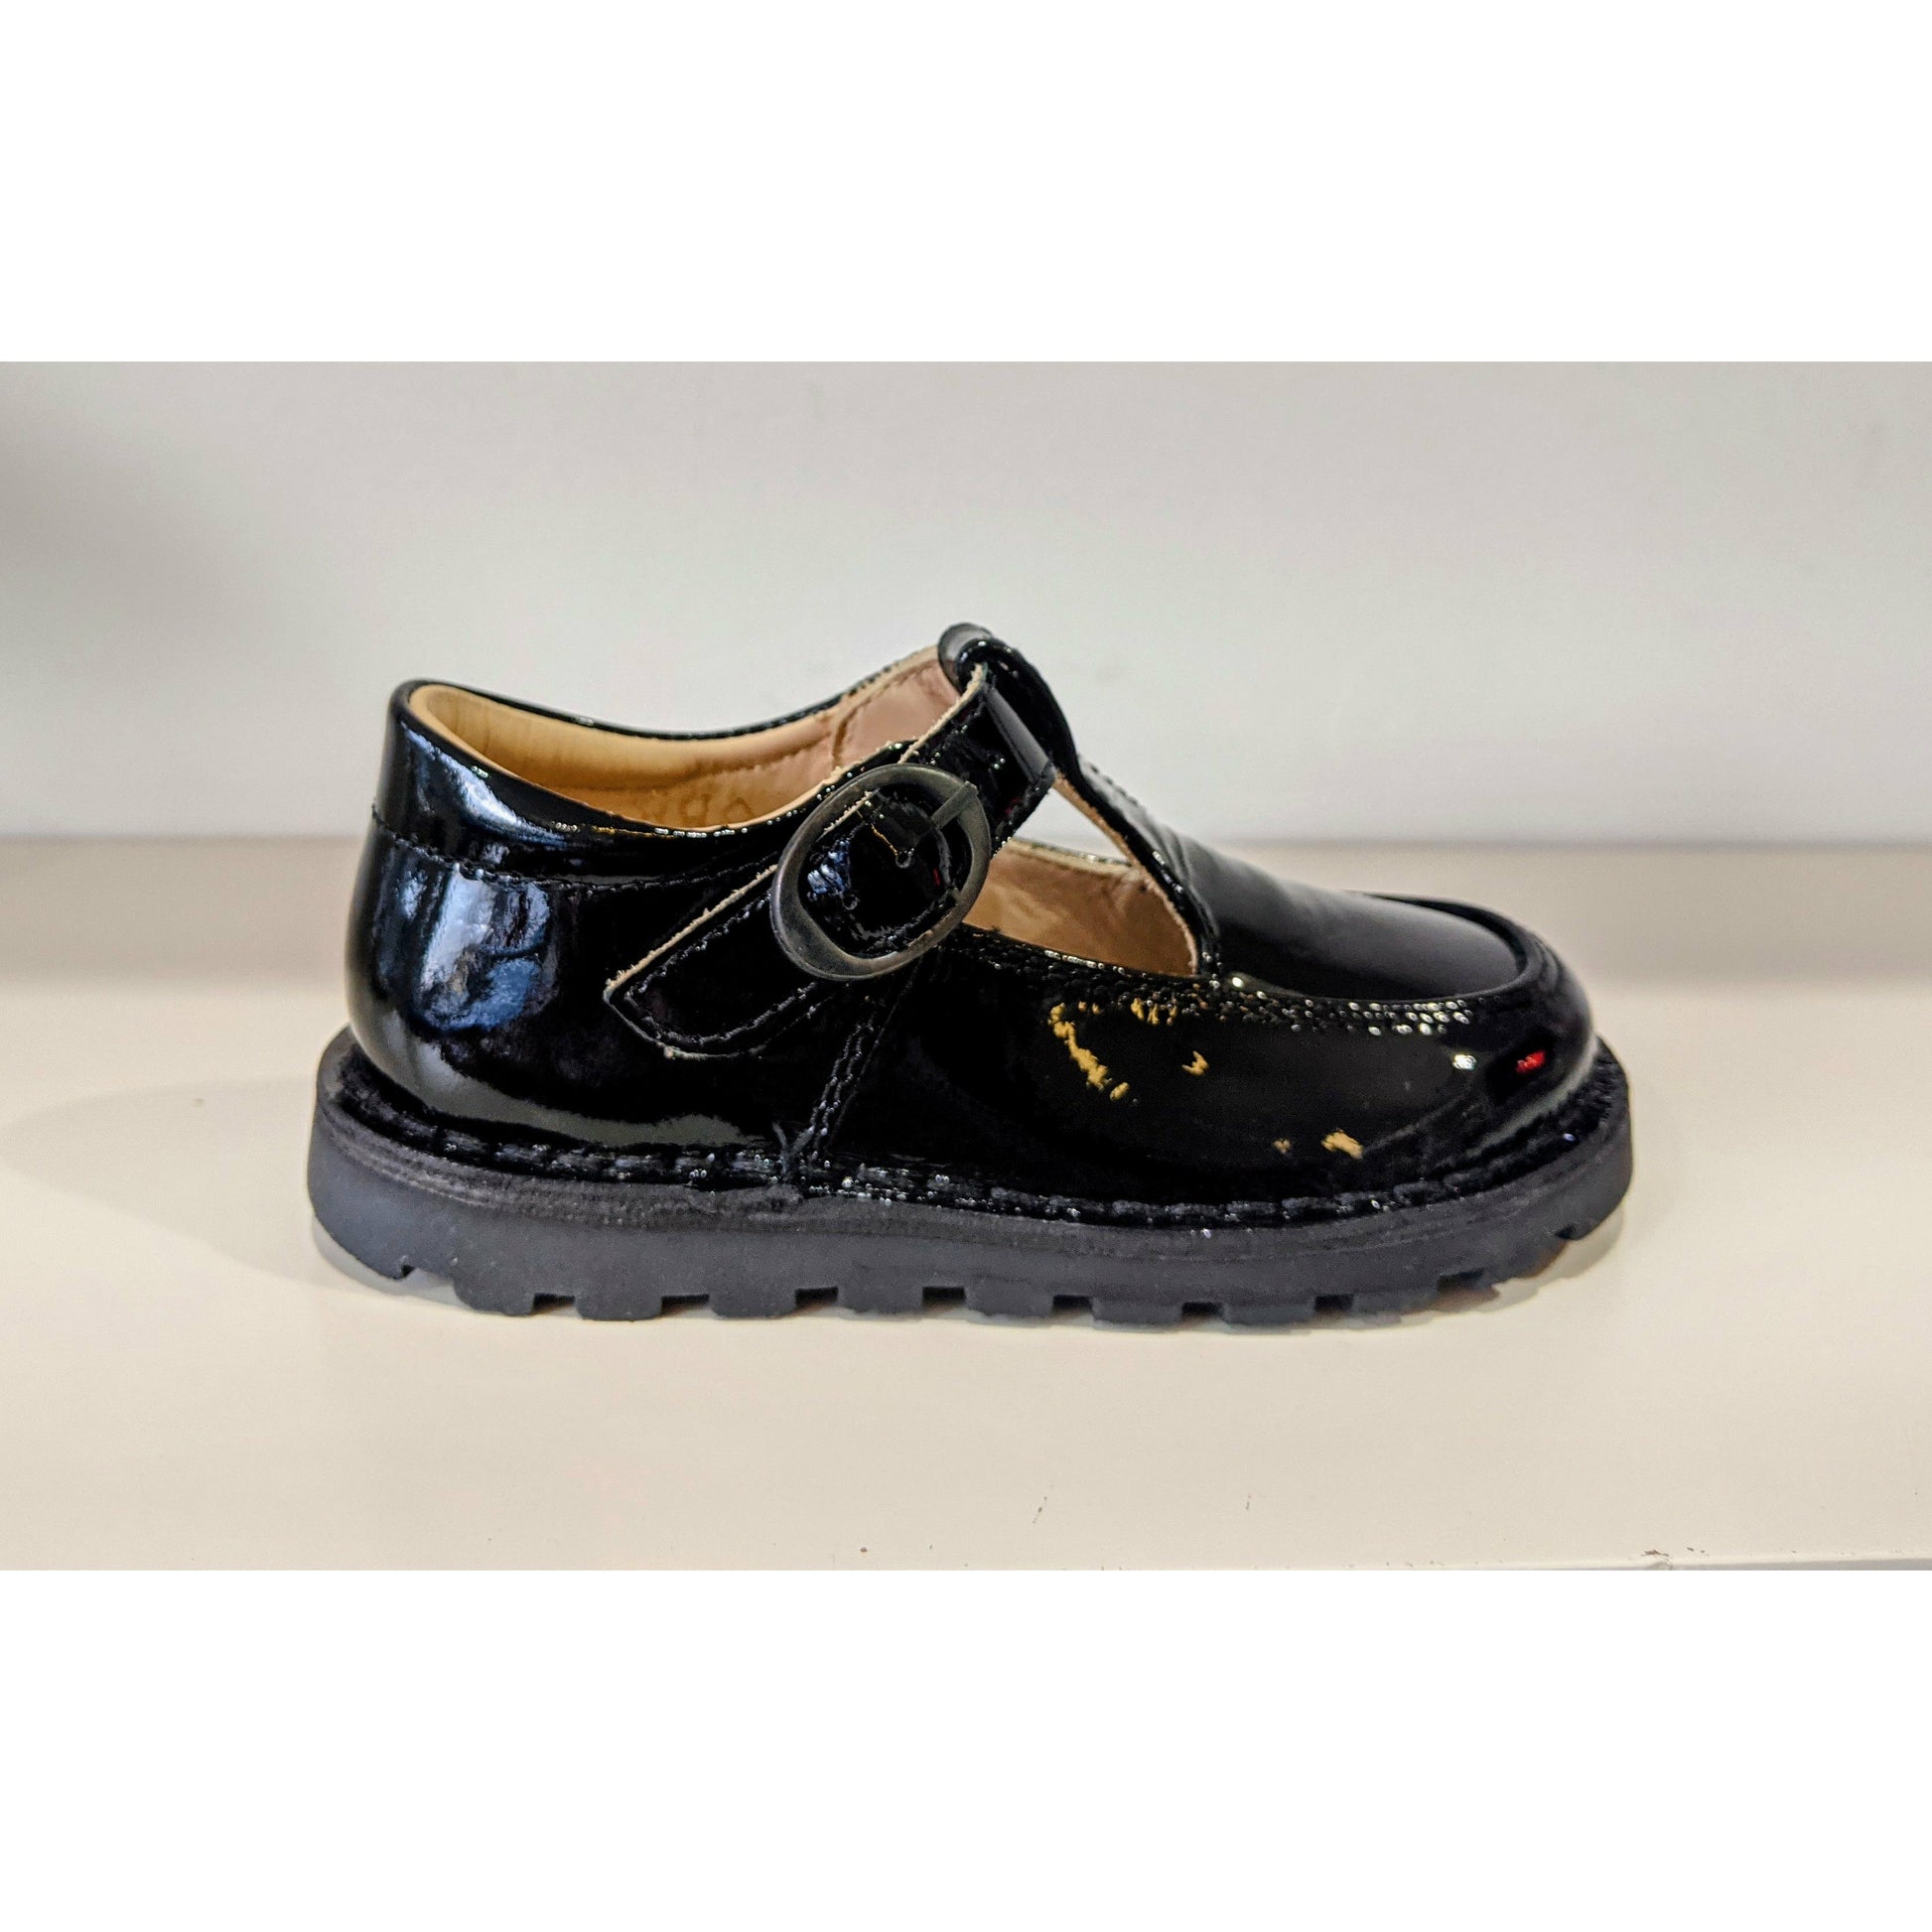 A girls T-Bar school shoe by Petasil, style Danny, in black patent with buckle fastening. Right side view.